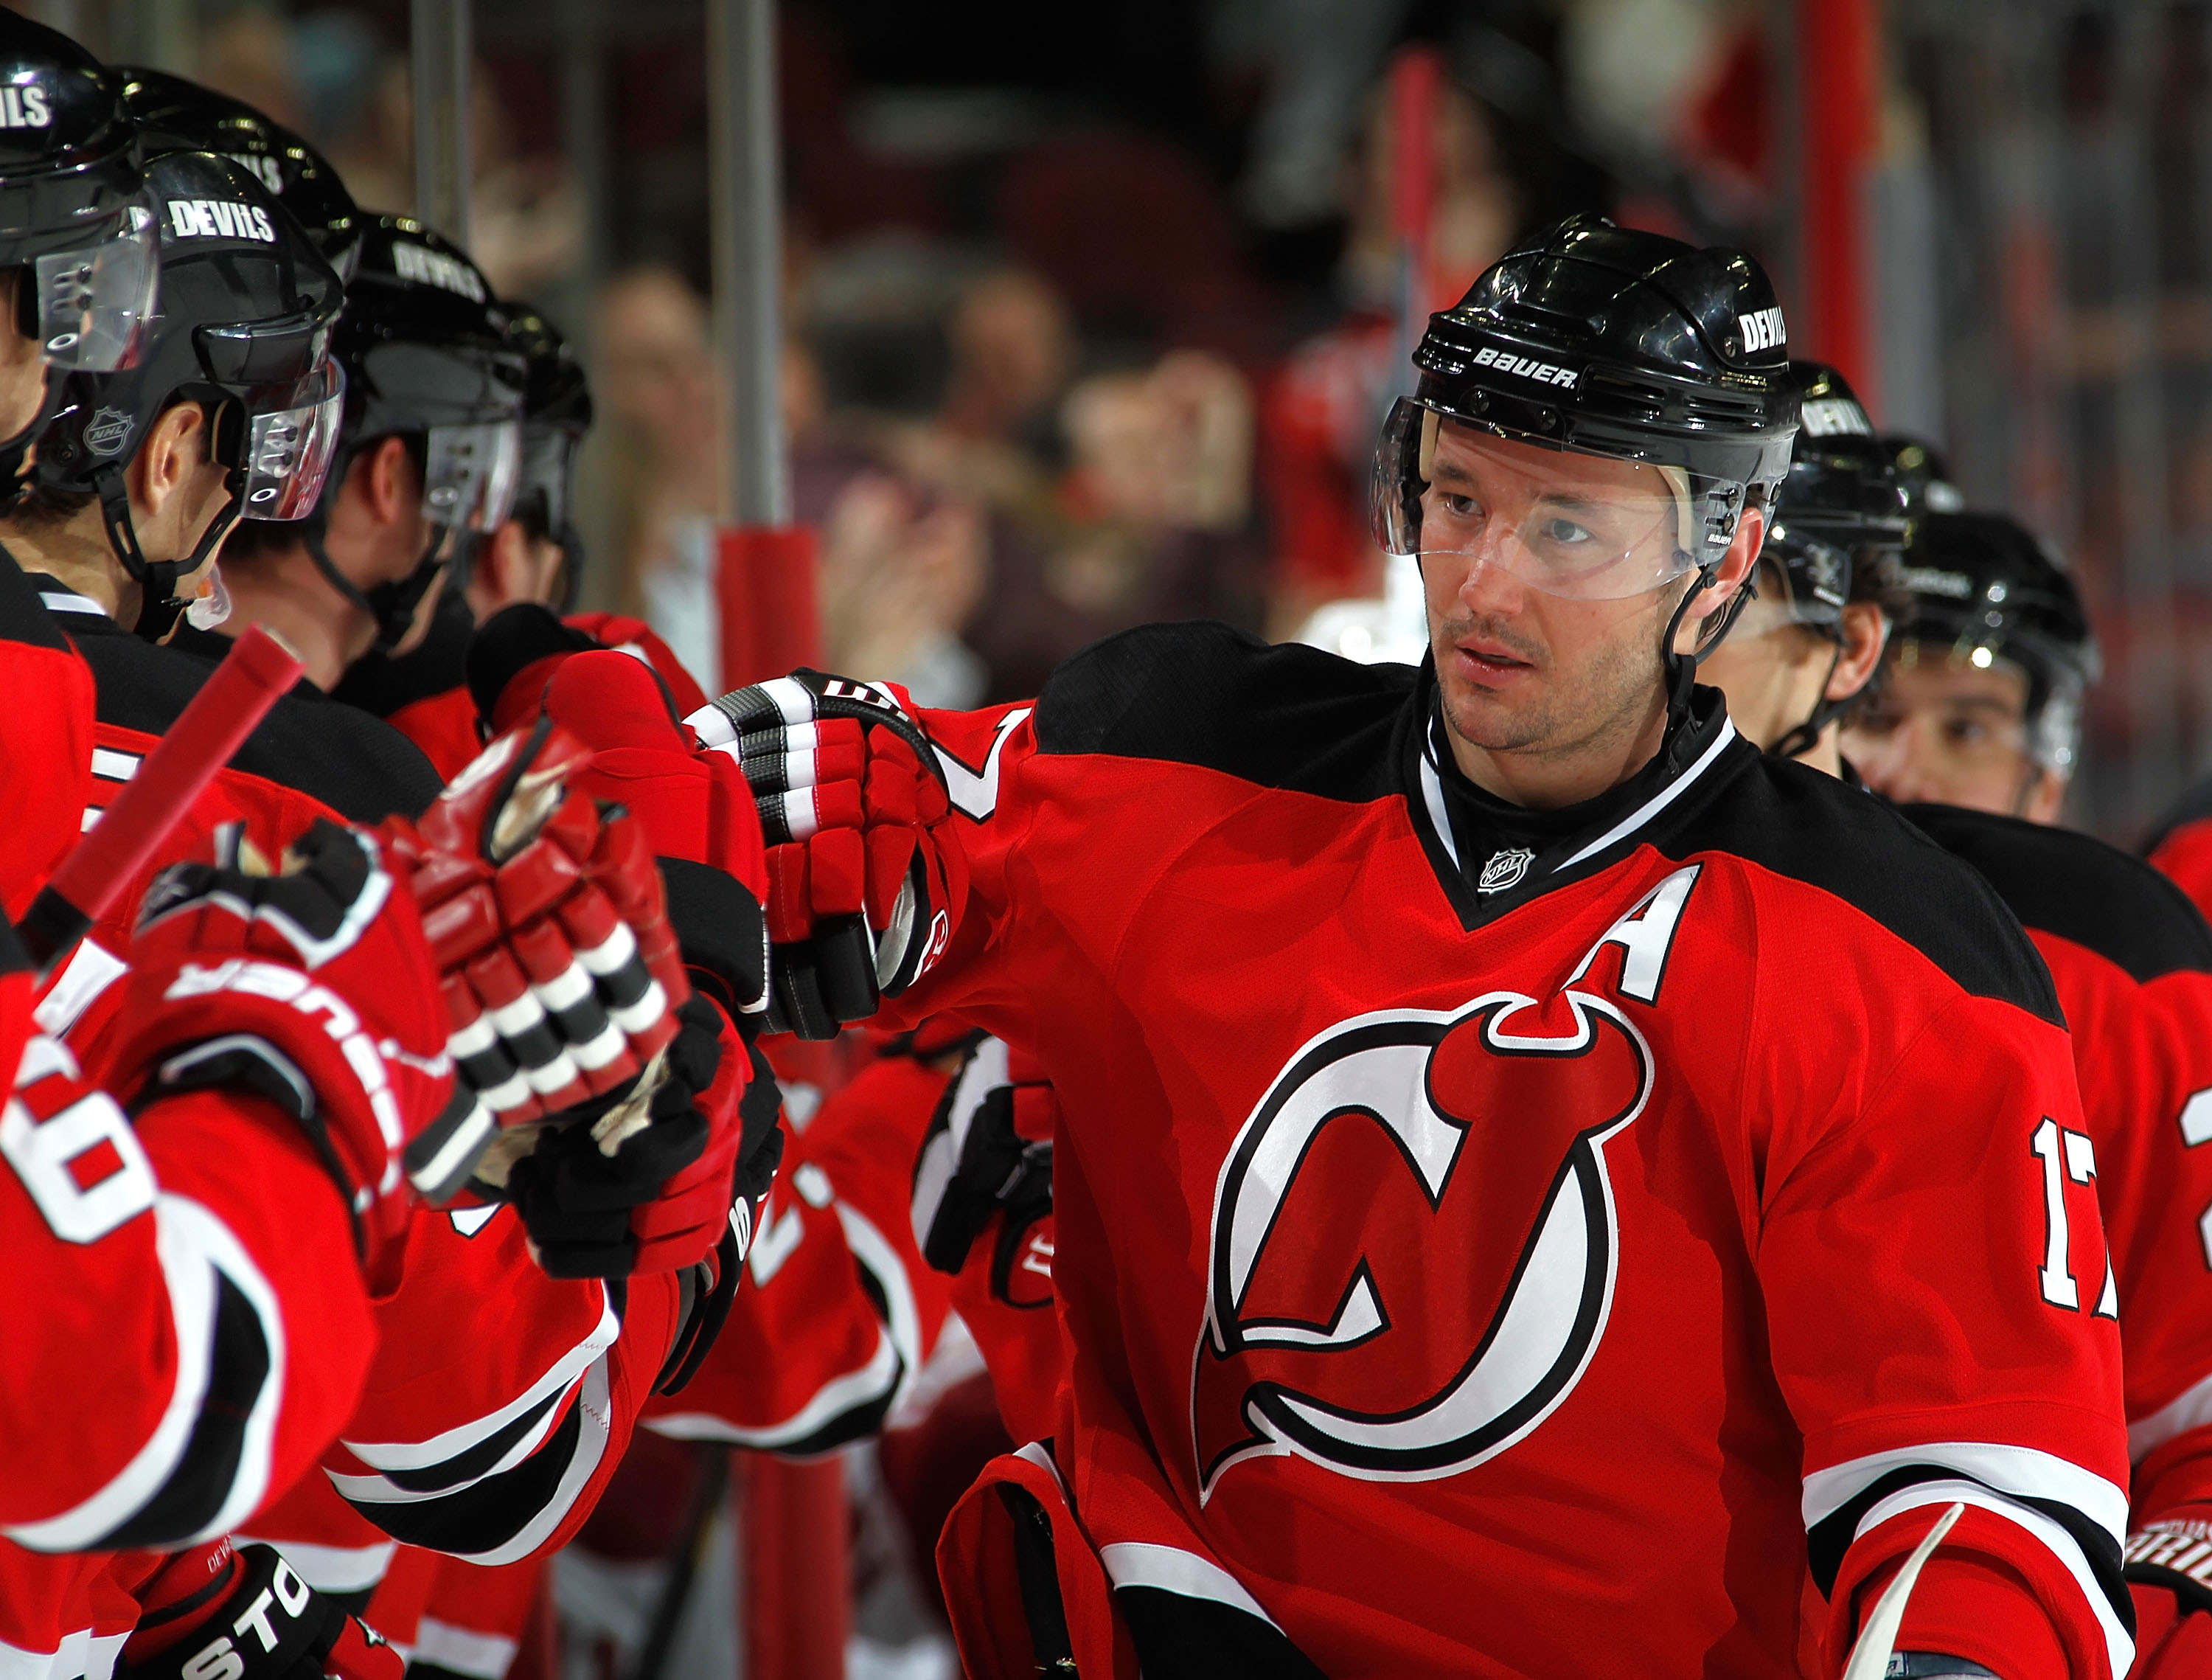 NEWARK, NJ - DECEMBER 15:  Ilya Kovalchuk #17 of the New Jersey Devils is congratulated at the Devils bench for his goal during the third period of a hockey game against the Phoenix Coyotes at the Prudential Center on December 15, 2010 in Newark, New Jers